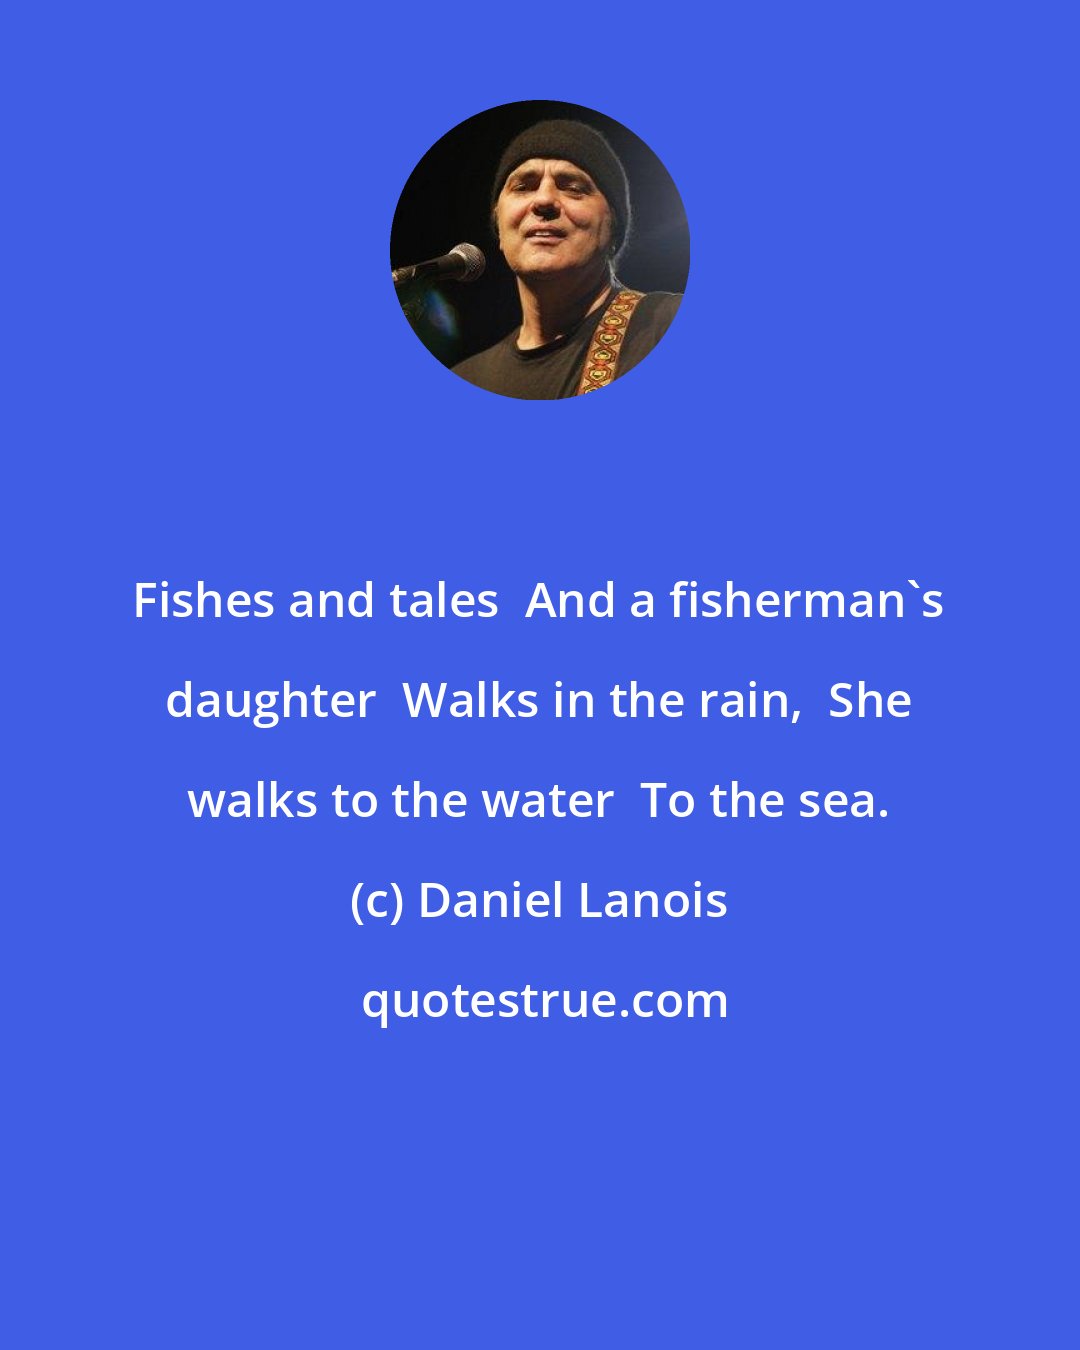 Daniel Lanois: Fishes and tales  And a fisherman's daughter  Walks in the rain,  She walks to the water  To the sea.